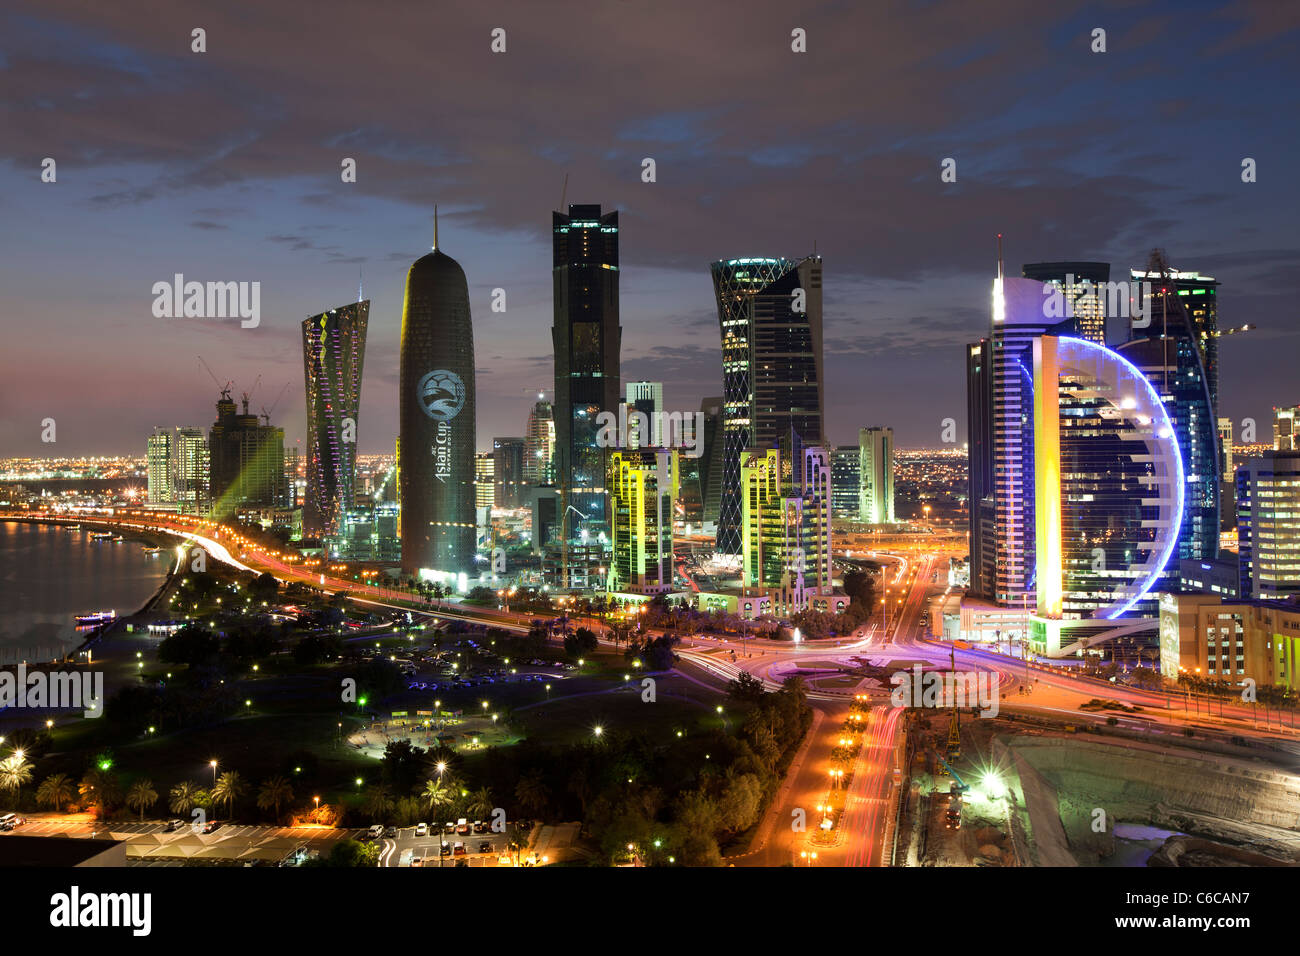 Qatar, Middle East, Arabian Peninsula, Doha, new skyline of the West Bay central financial district of Doha Stock Photo